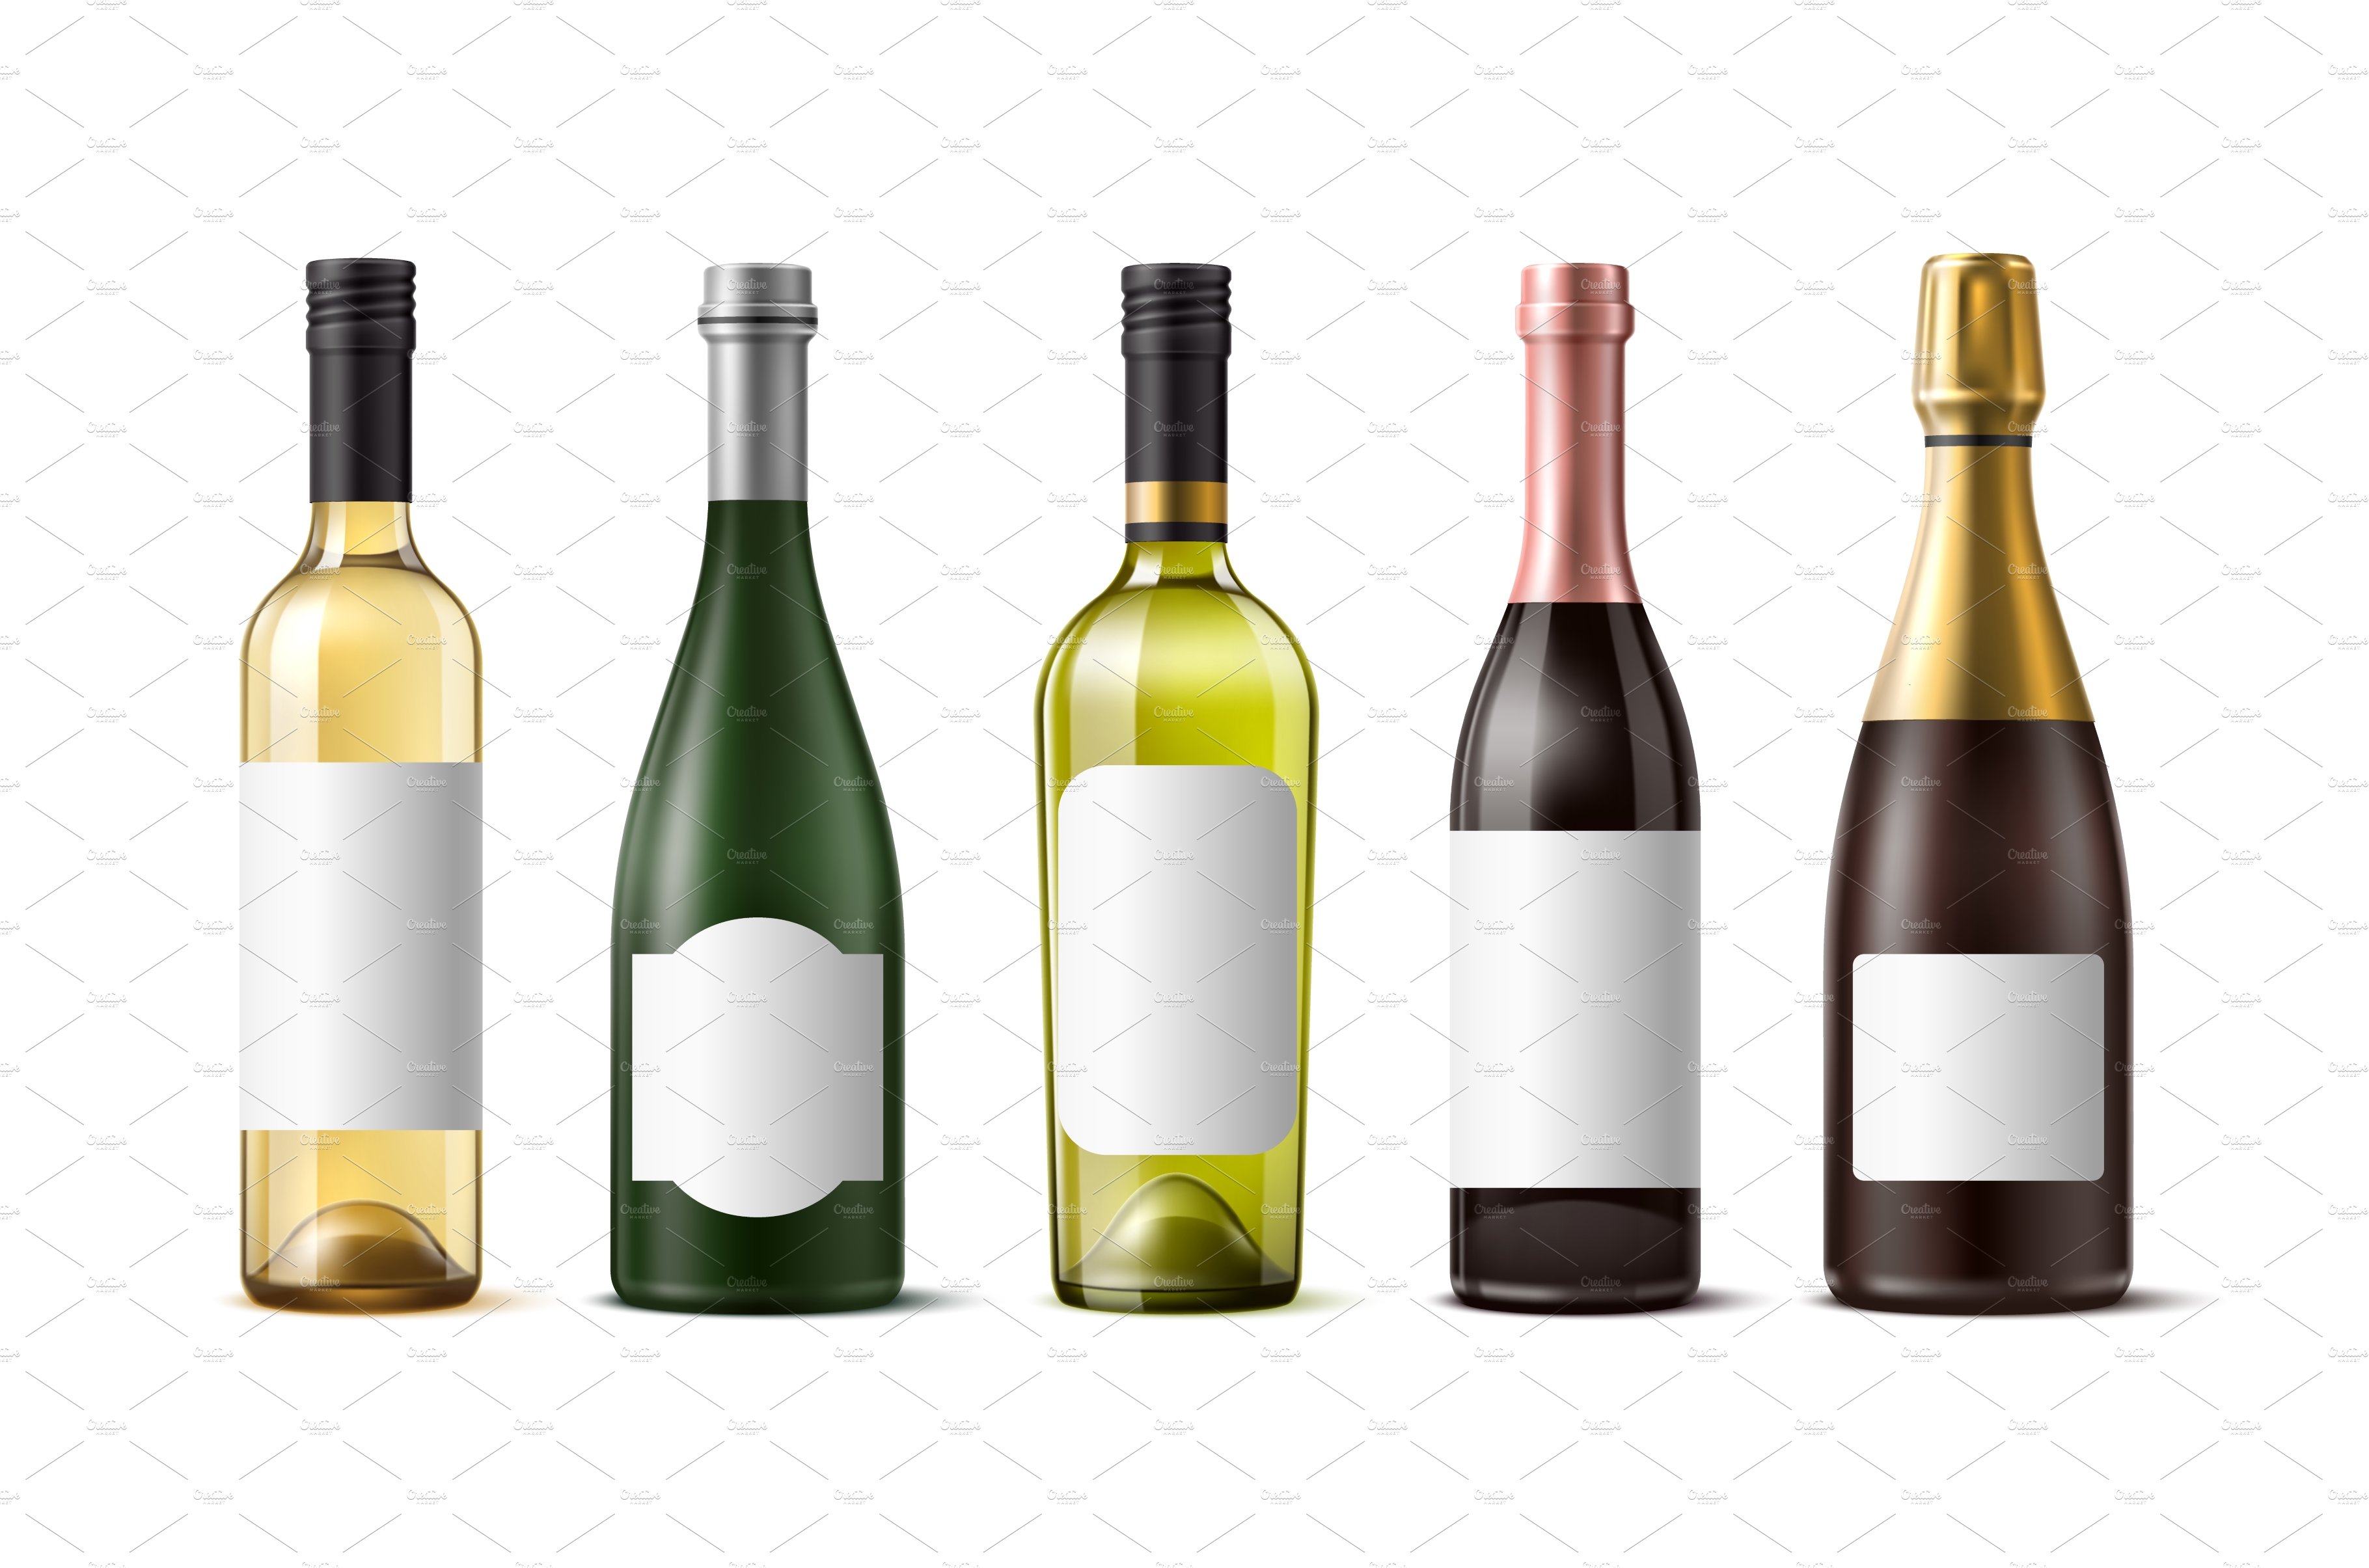 Realistic wine bottles. 3d isolated cover image.